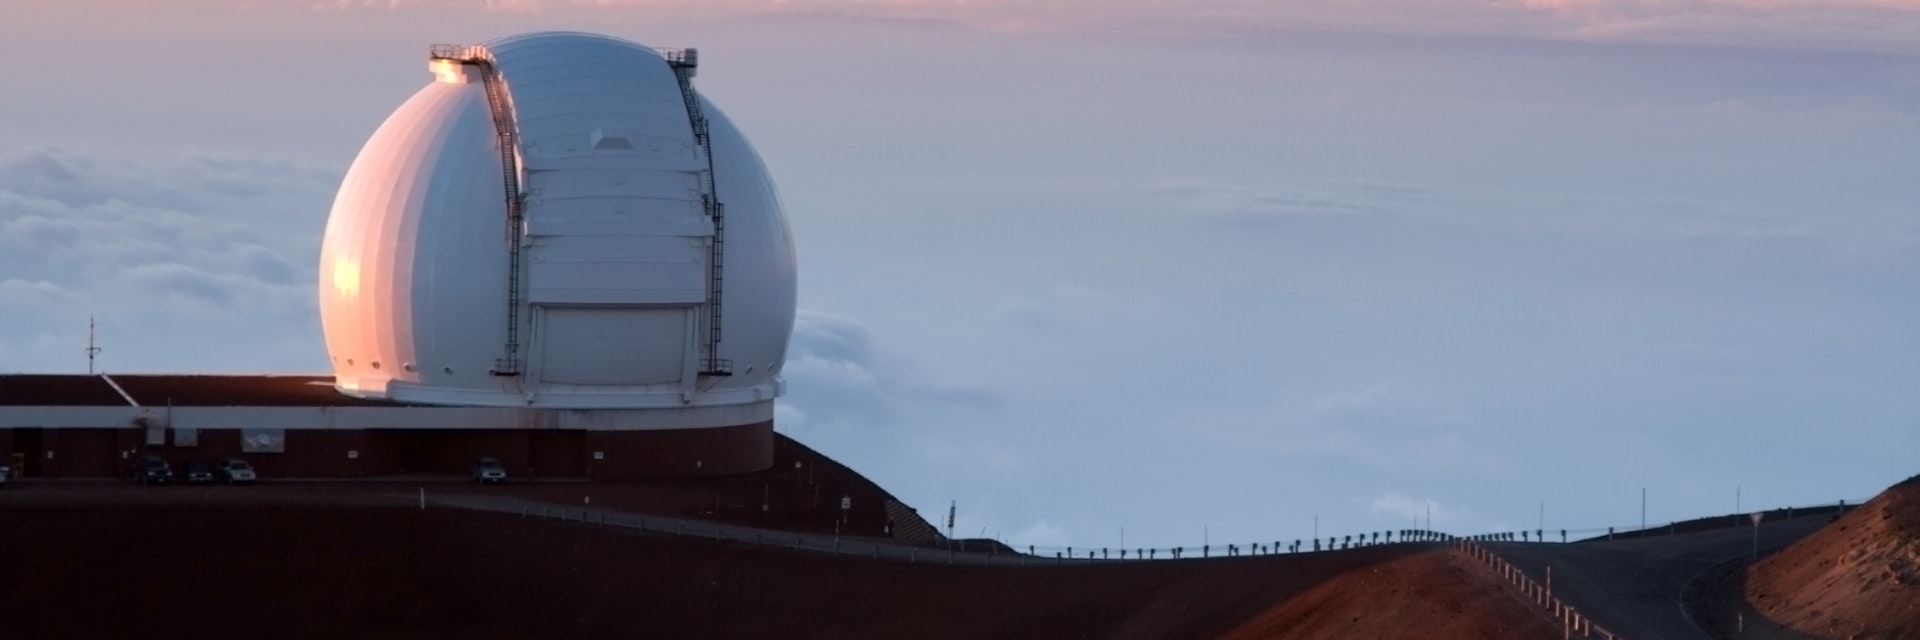 Observatory in Hawaii.
172372636
"Keck Observatory, Alien, Big Island, Cloud, Hawaii Islands, Mauna Kea, Medicine And Science, Observatory, Planet, Research, Research, Science, Science Backgrounds", Space, Star, Sunset